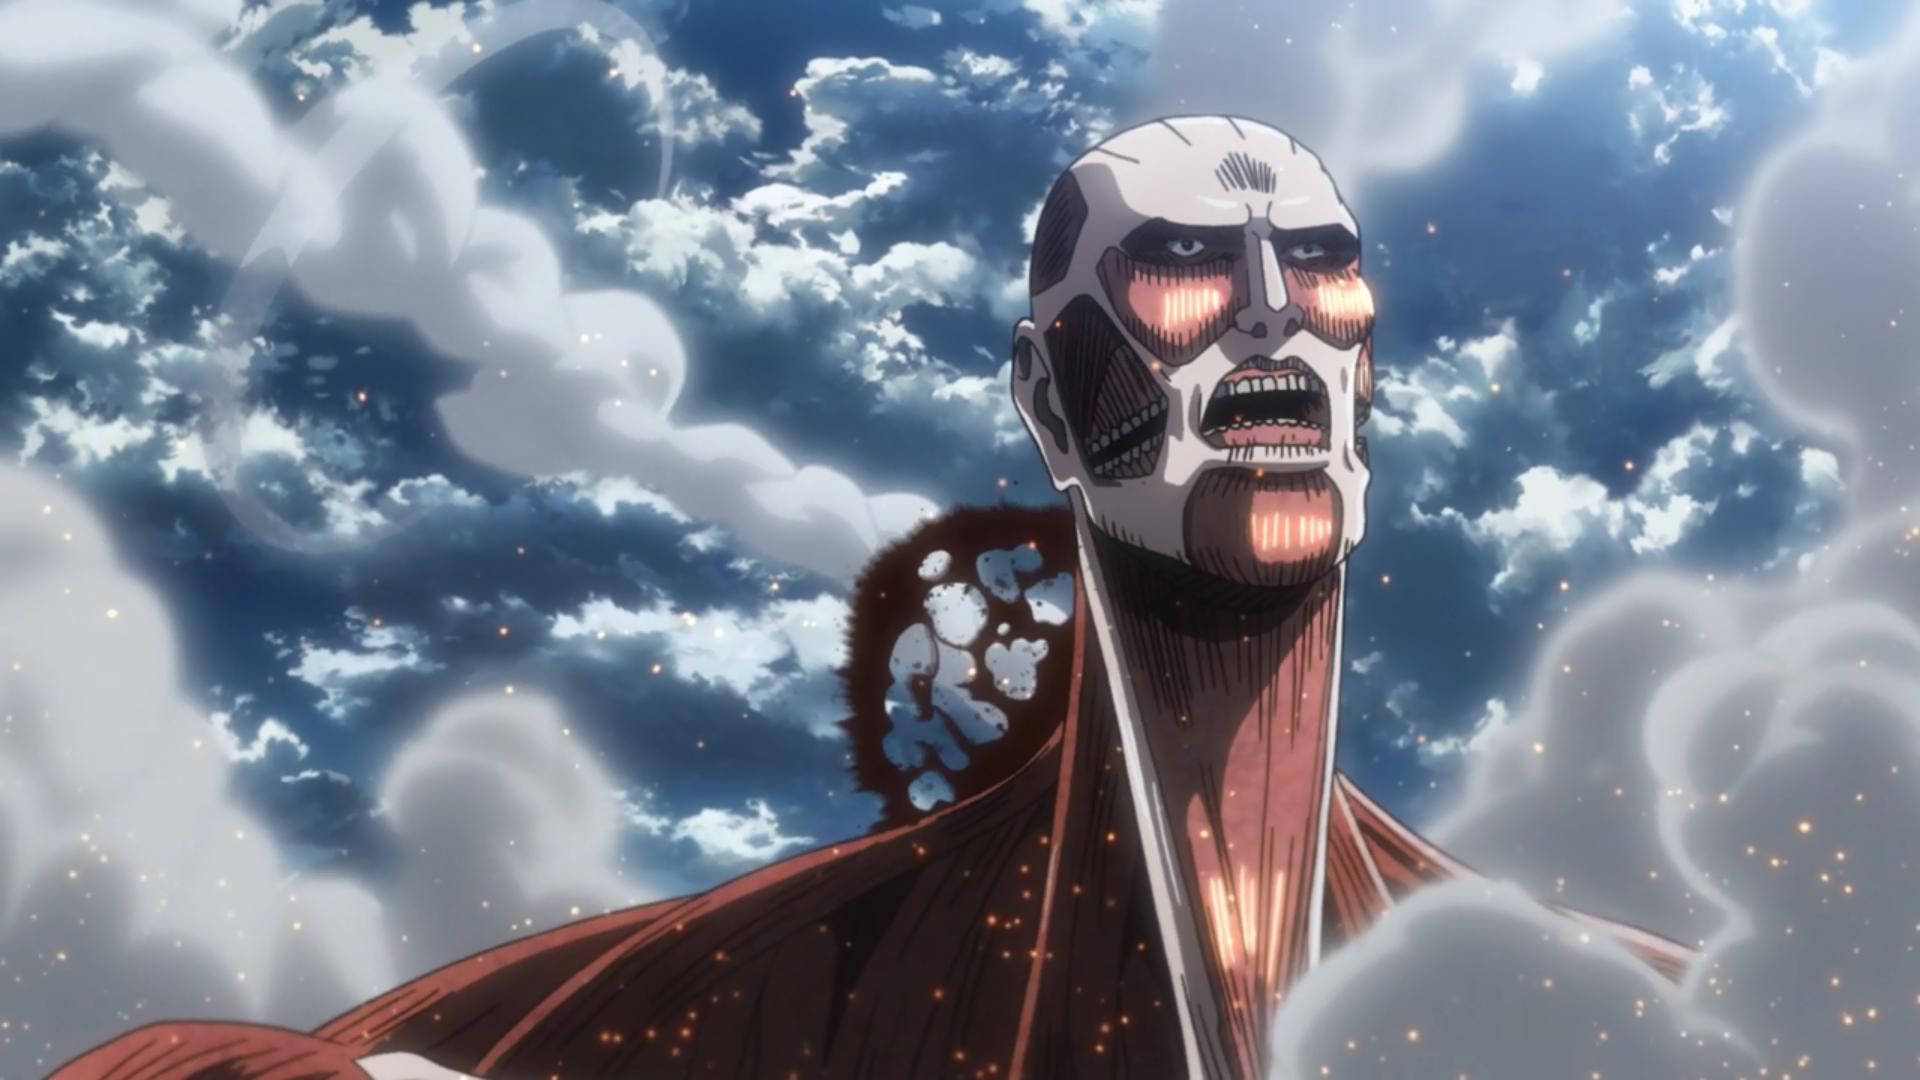 It looks scarier 2D colossal titan looks cute and I cant take him seriously...